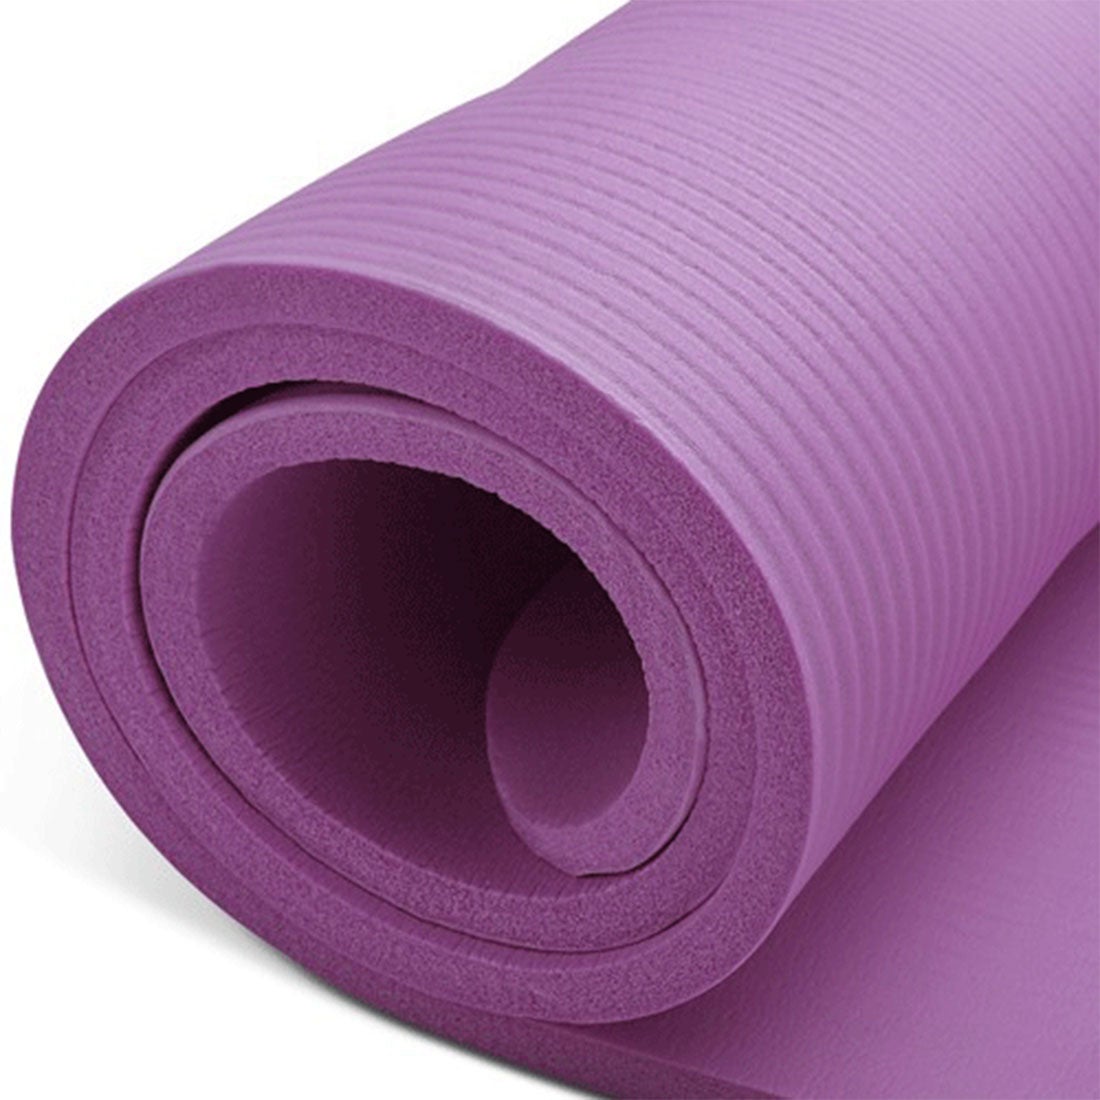 Yoga Set Health Fitness Home Yoga Mat with Rally Stretch Strap